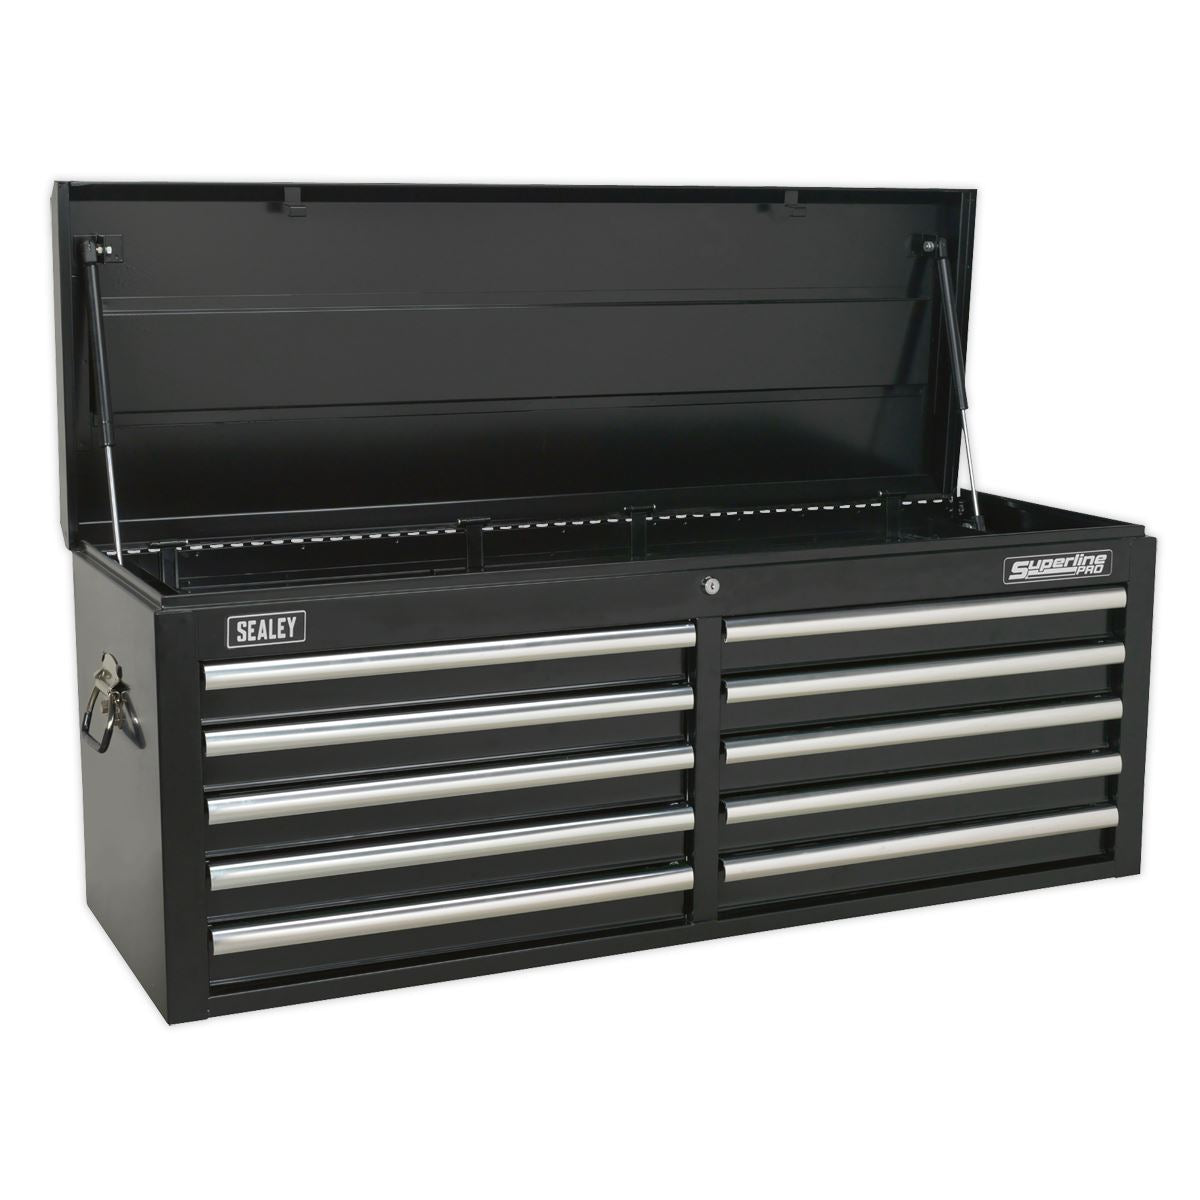 Sealey Superline Pro Topchest 10 Drawer with Ball-Bearing Slides - Black